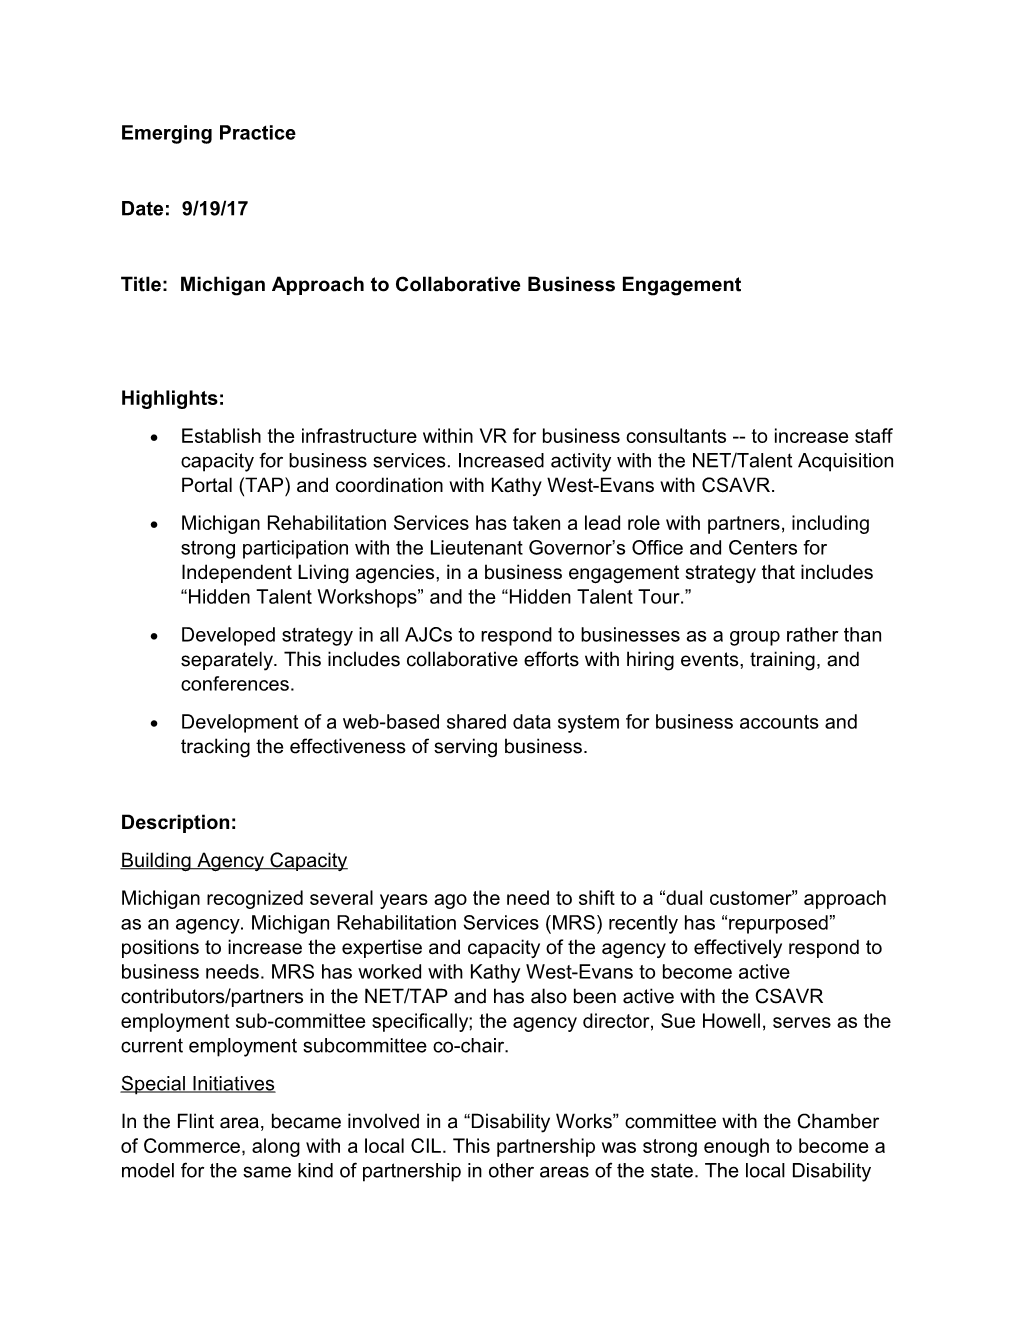 Title: Michigan Approach to Collaborative Business Engagement